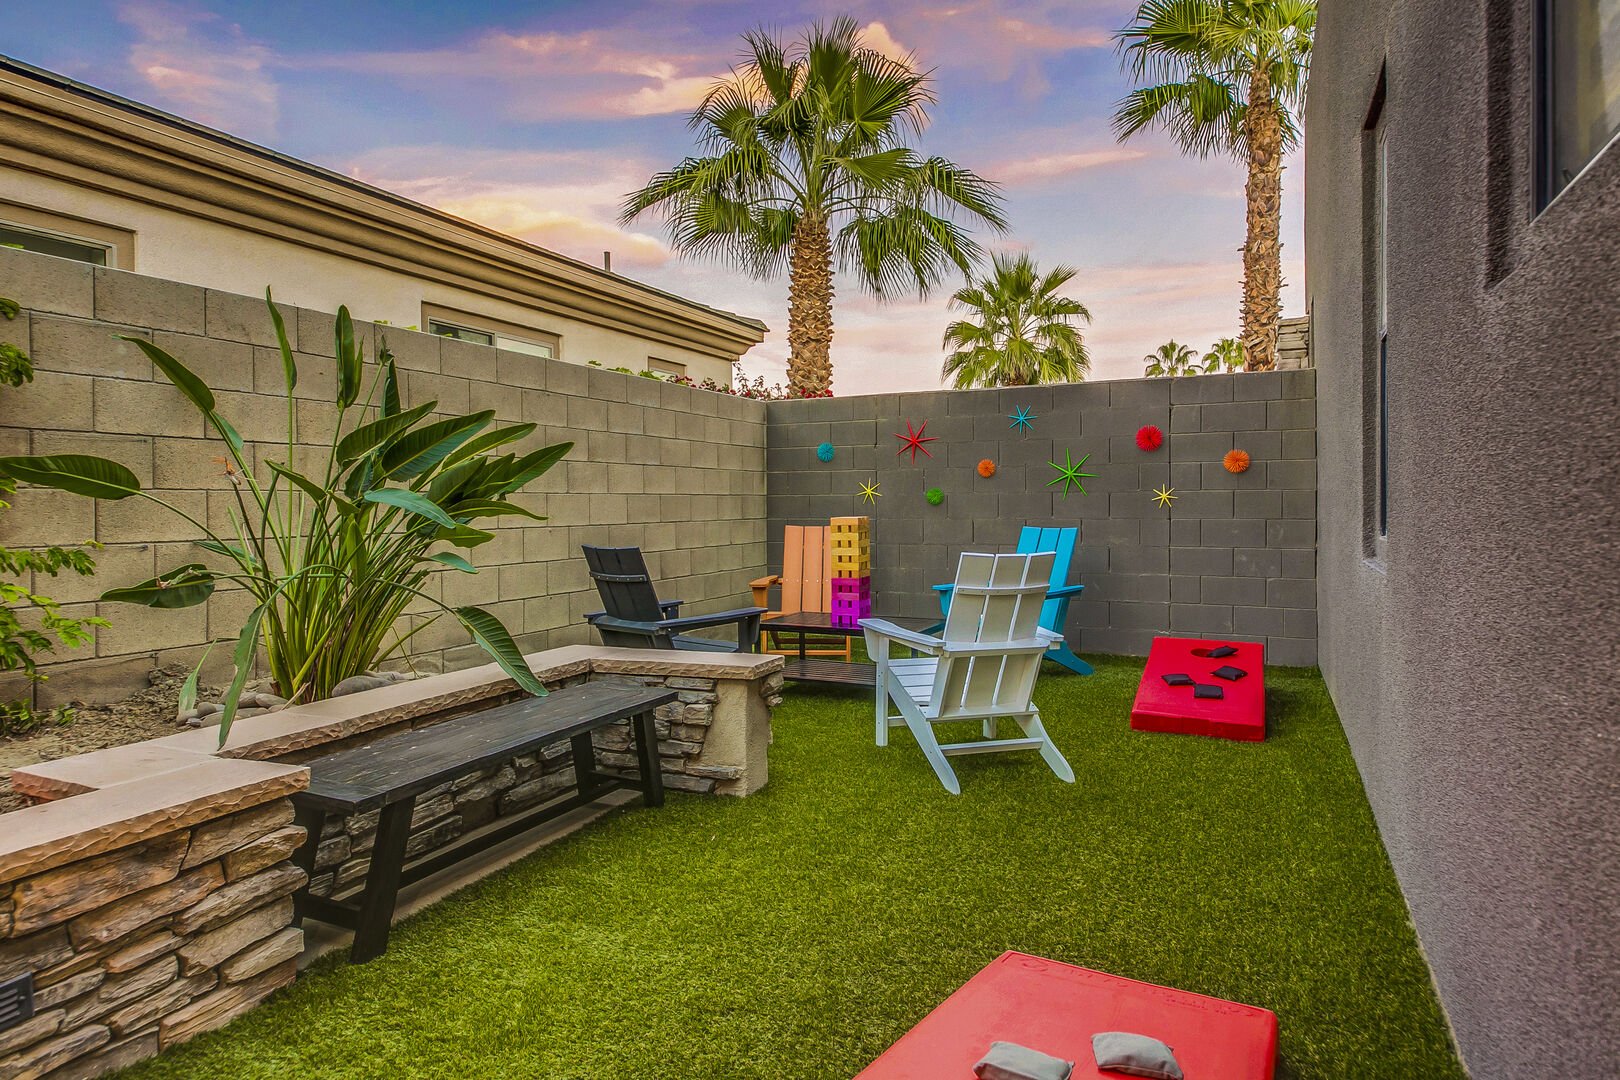 Enjoy playing Giant Jenga on this patio area with seating for four while the kids enjoy the classic game of bean bag toss!